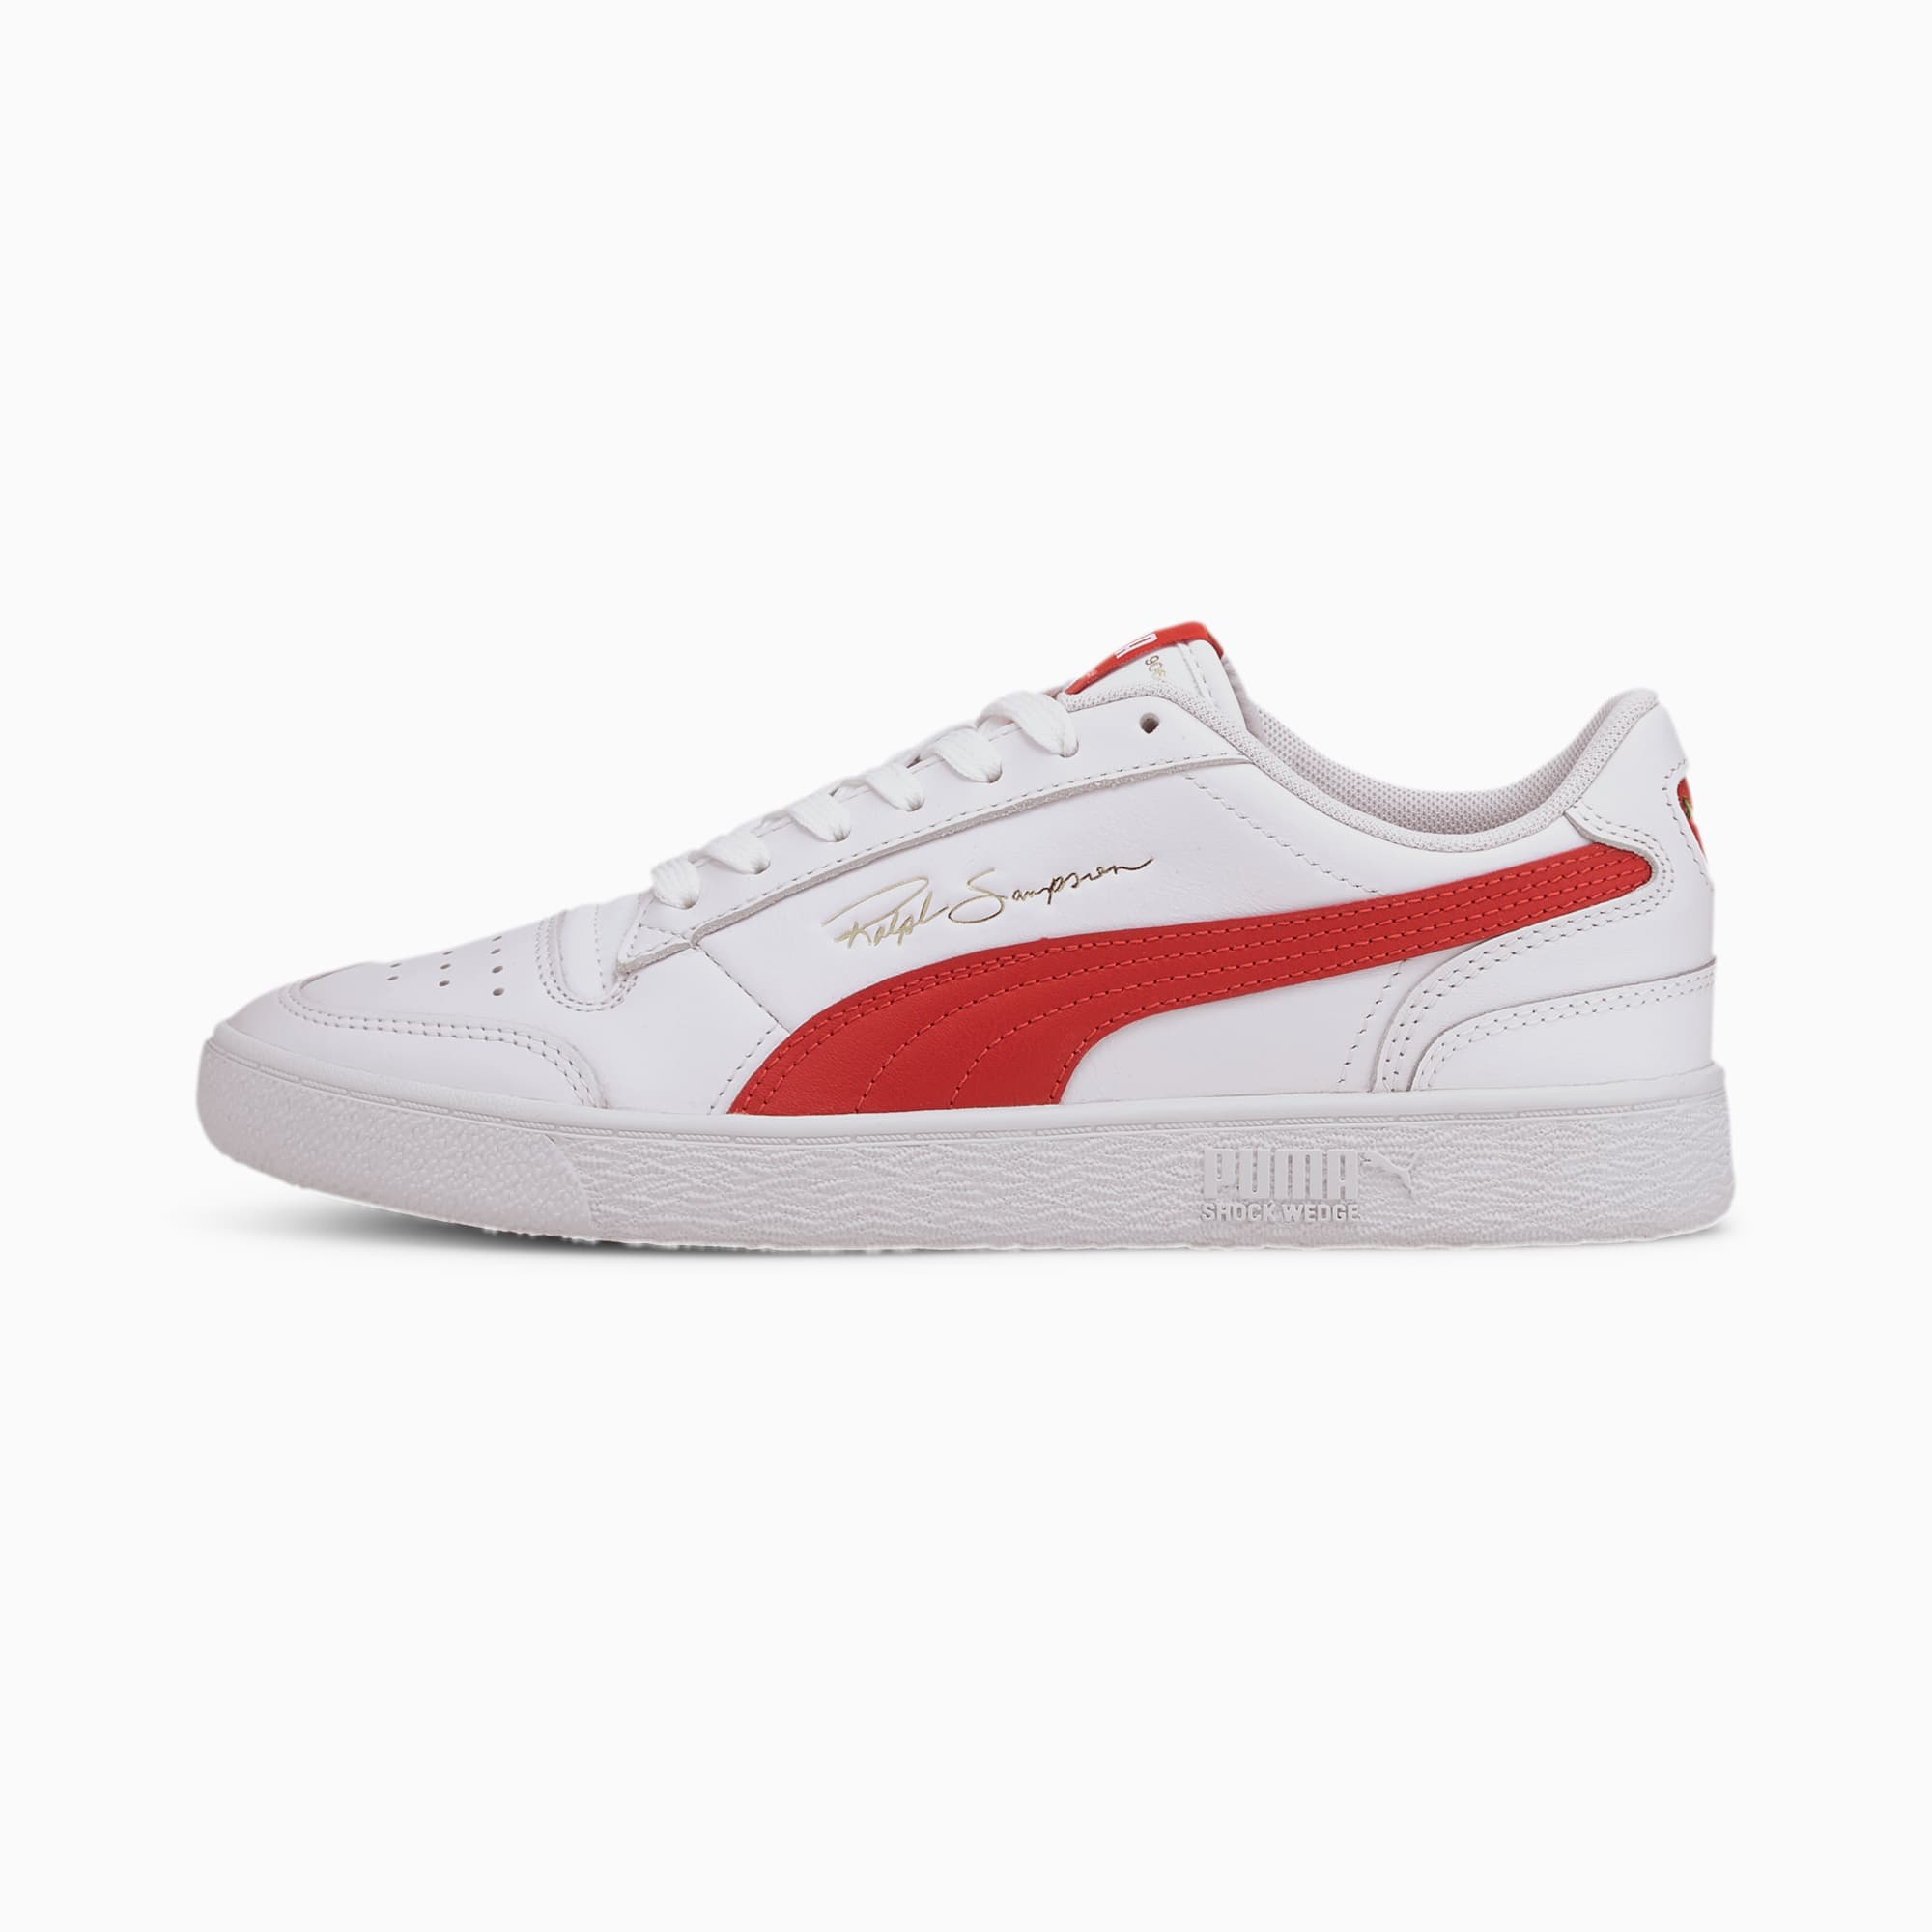 PUMA Chaussure Ralph Sampson Lo sneakers, Blanc/Rouge, Taille 36, Chaussures